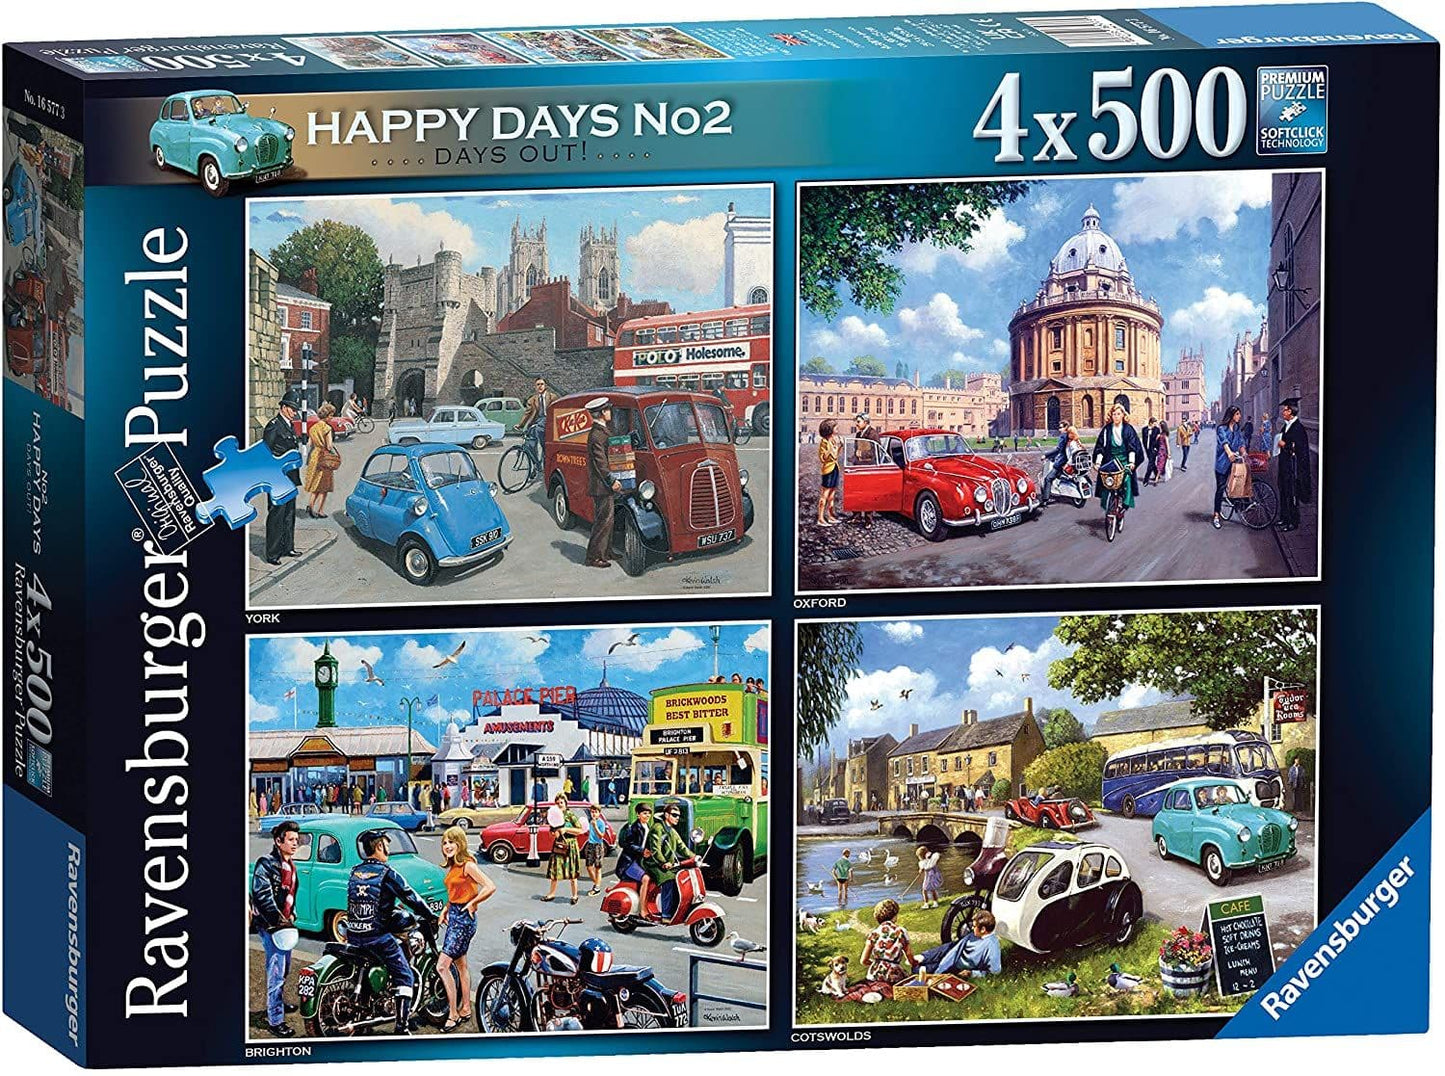 Ravensburger - Happy Days No 2 - Days Out  4 x 500 Piece Jigsaw Puzzle